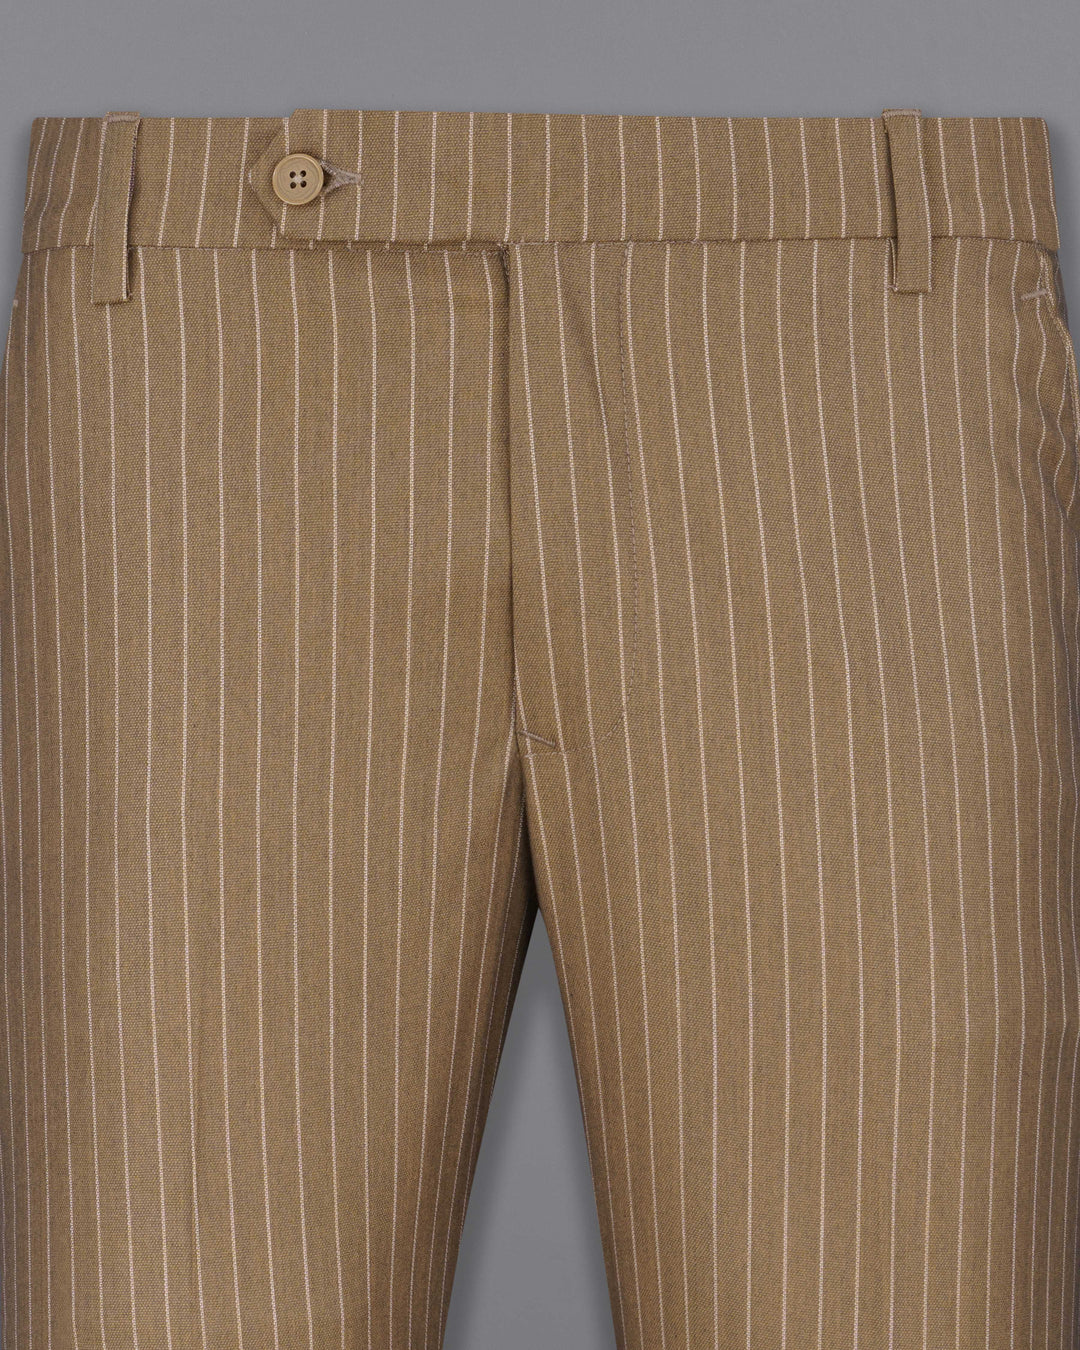 Buy Peach Maroon Stripe Men Pant Cotton Handloom for Best Price Reviews  Free Shipping